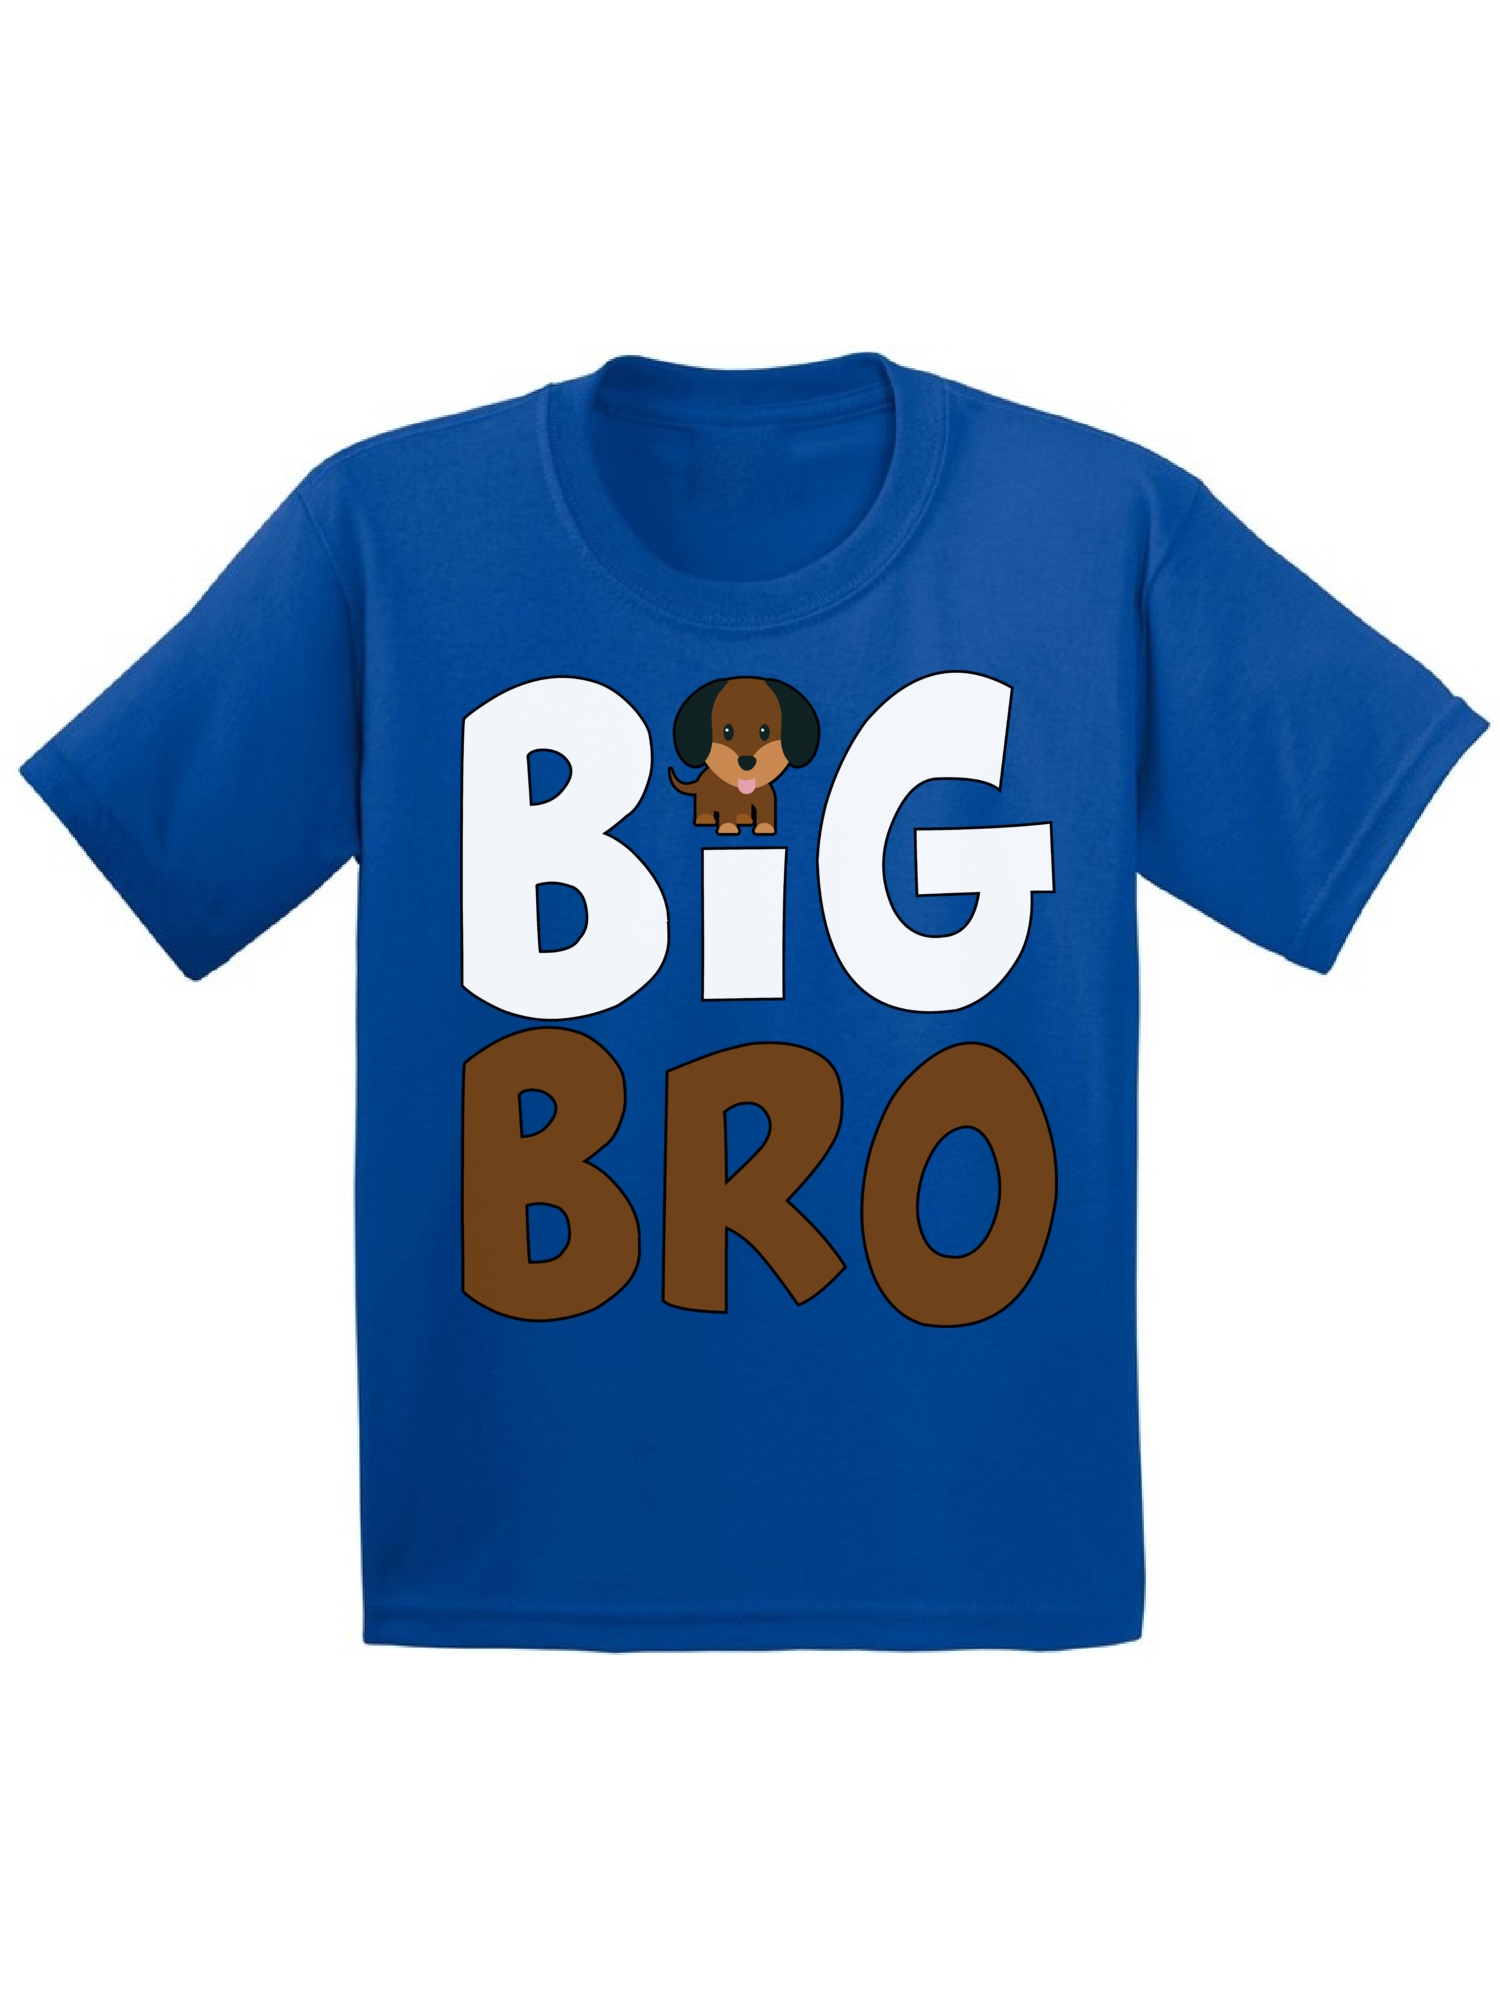 Only Child Big Brother Big Brother Puppy Shirt Big Brother Dog Shirt Baby Announcement Big Bro Dog Shirt Baby Announcement Dog Shirt